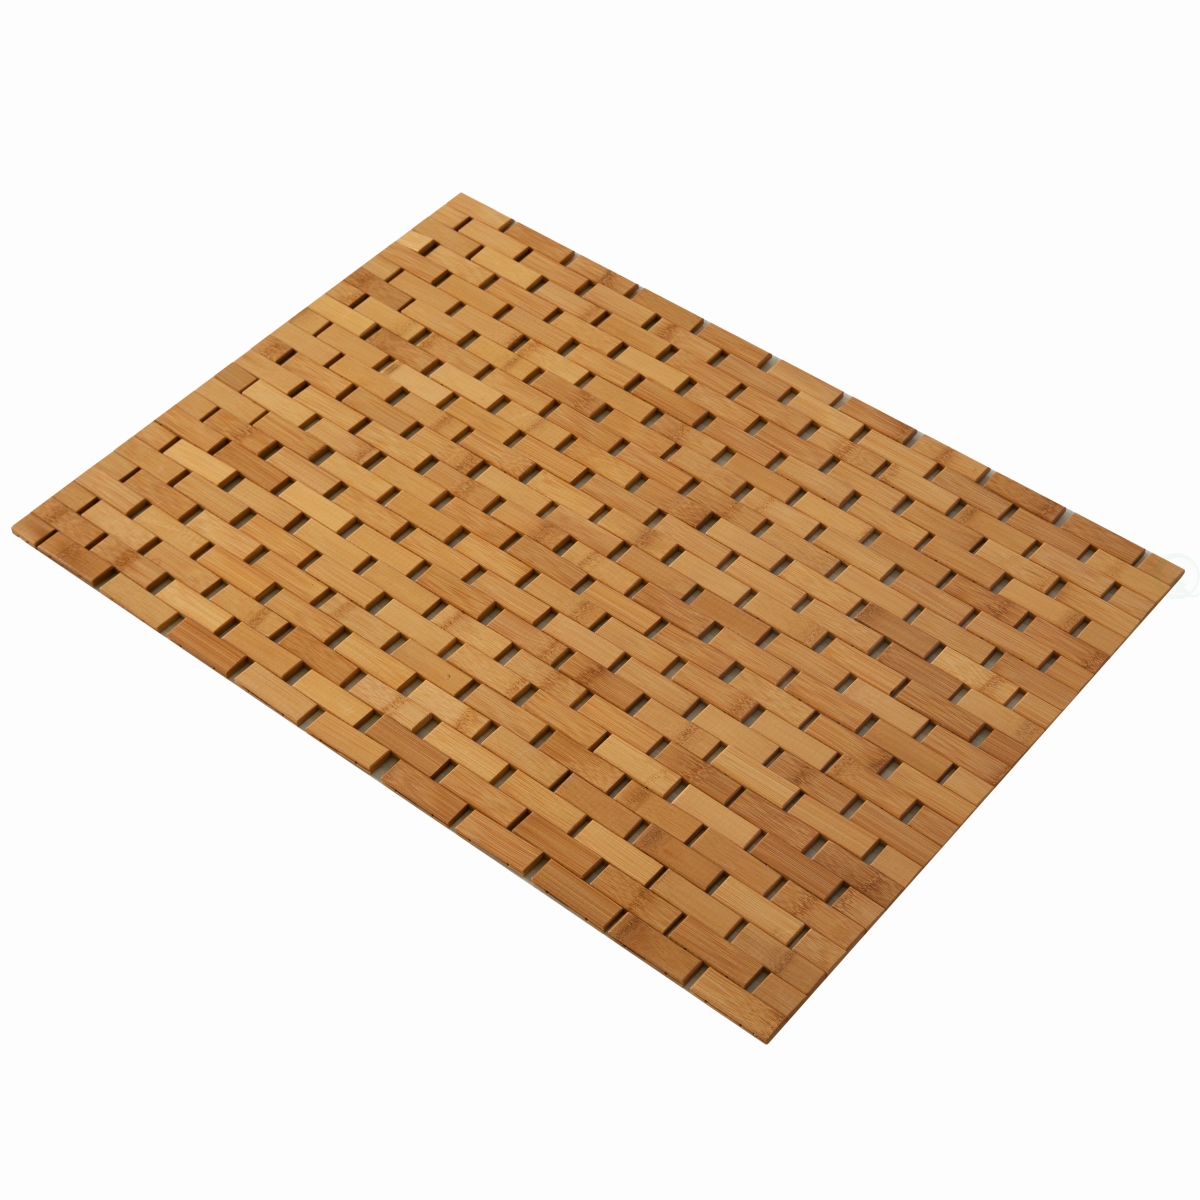 Picture of Basicwise QI004613 Foldable Bamboo Bath Mat Natural Anti-Slip Rug, Flooring Solution for Stylish Bathroom and Vanity Decor